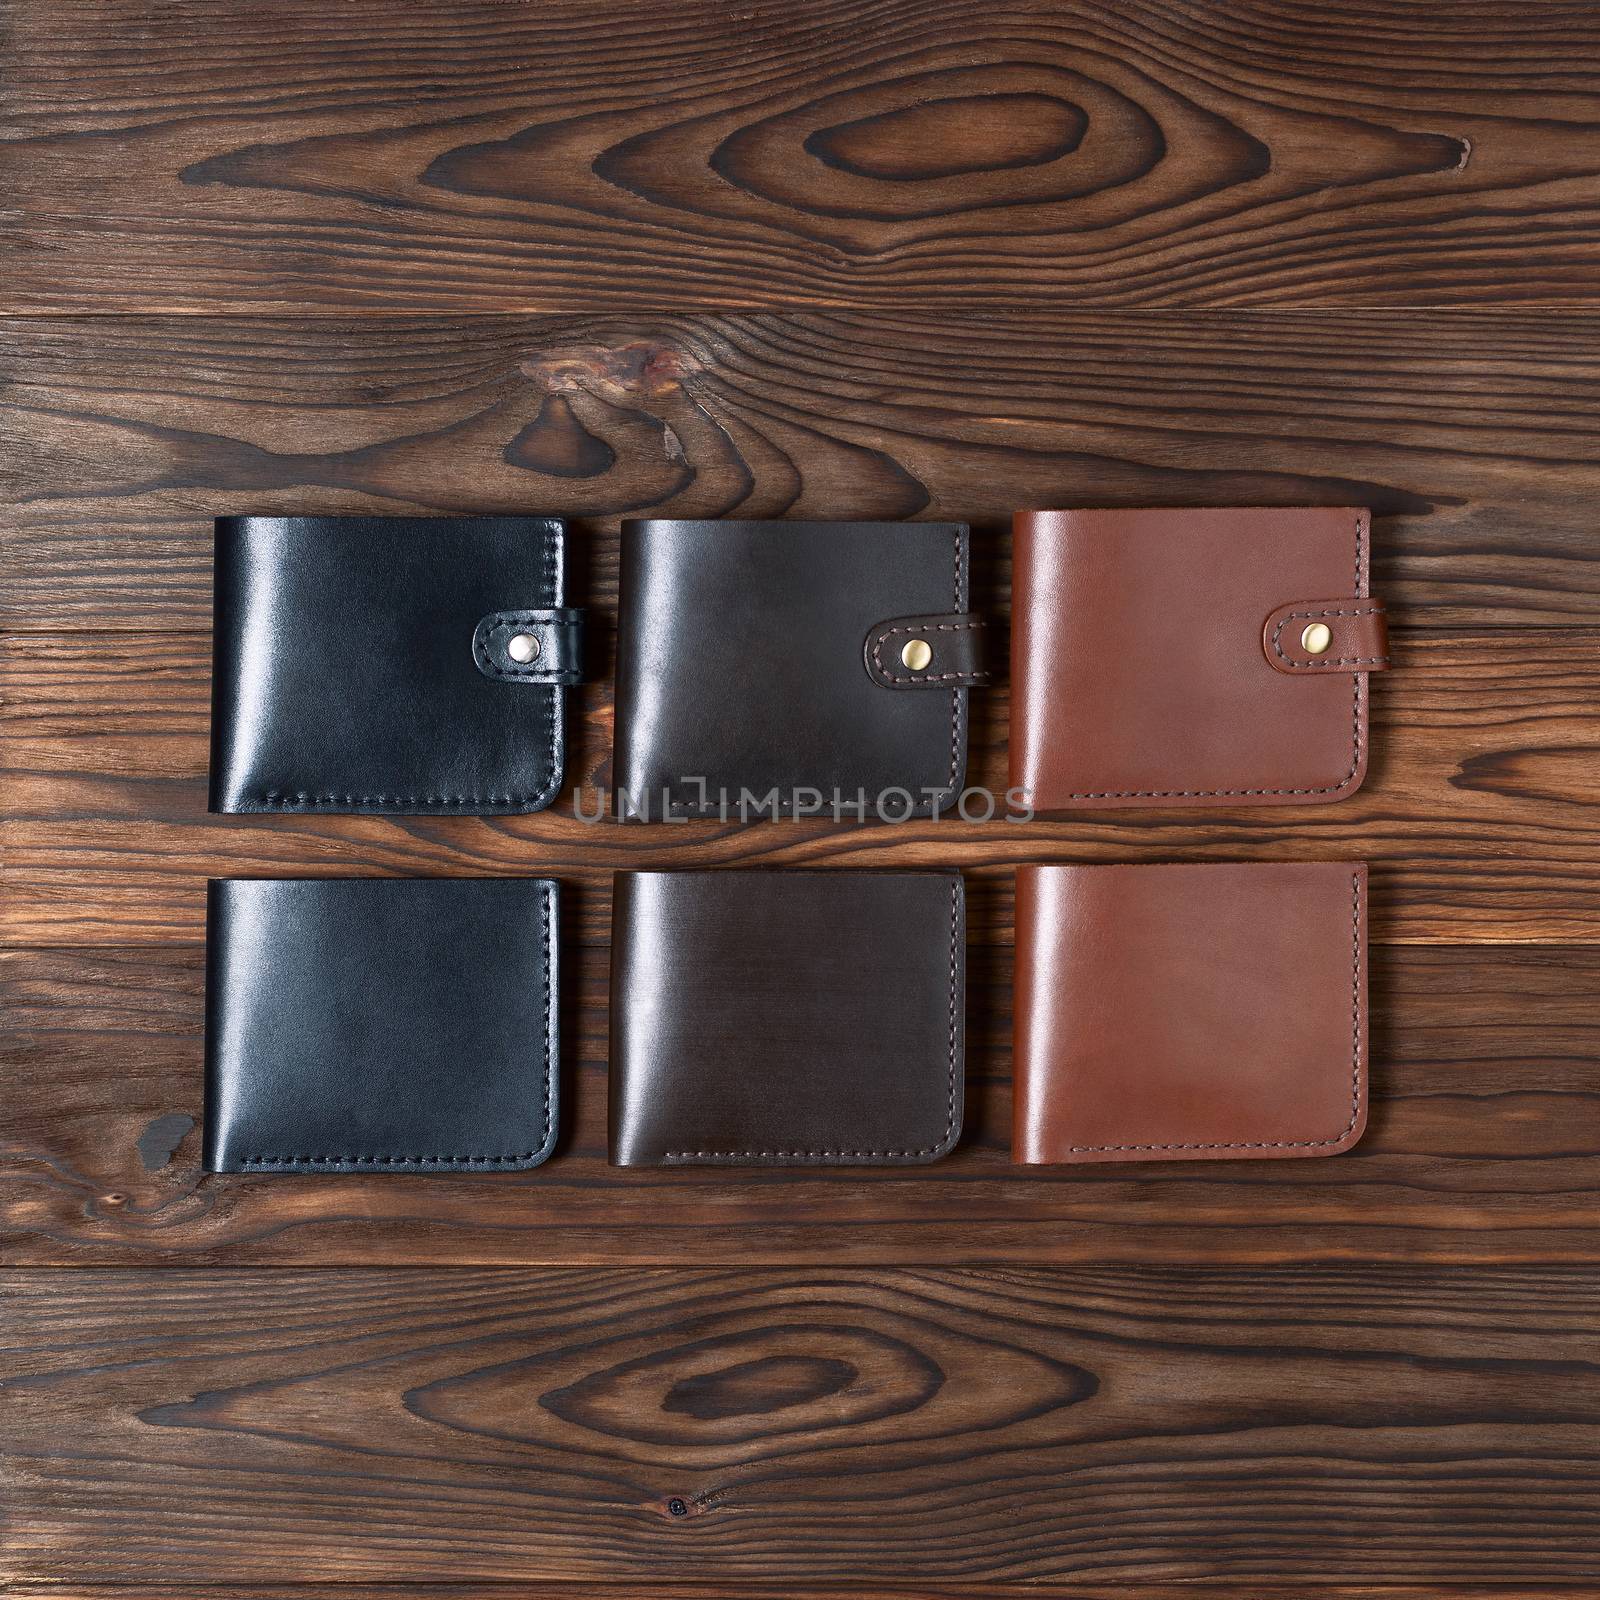 Six handmade leather wallets on wooden textured background. Up to down view. Wallet stock photo. by alexsdriver